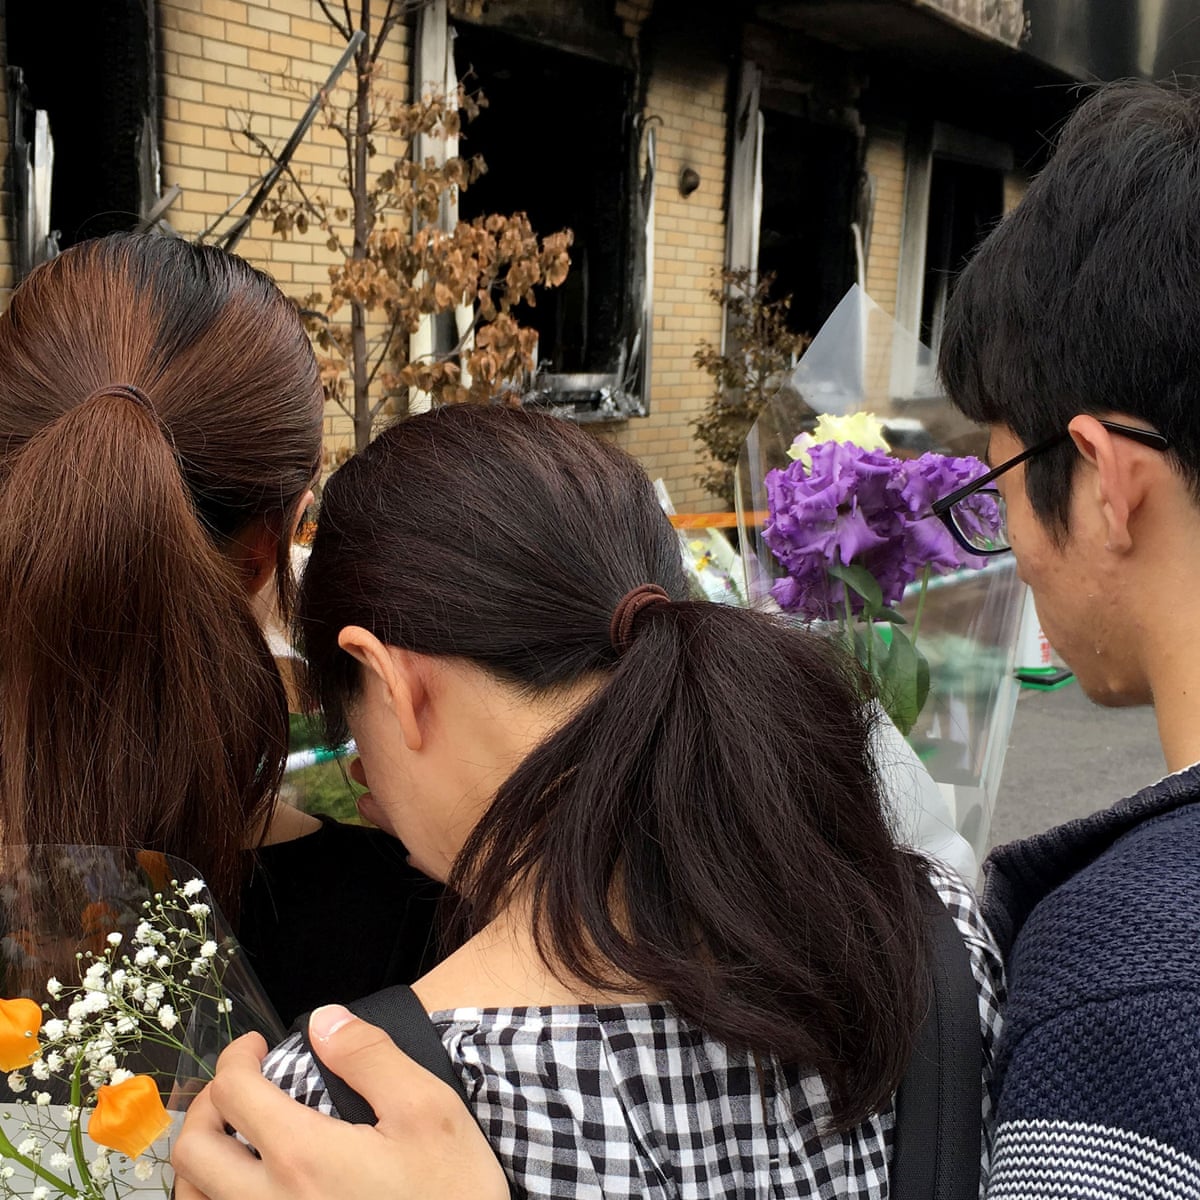 Kyoto Animation suspect staked out anime locations before arson attack |  Japan | The Guardian